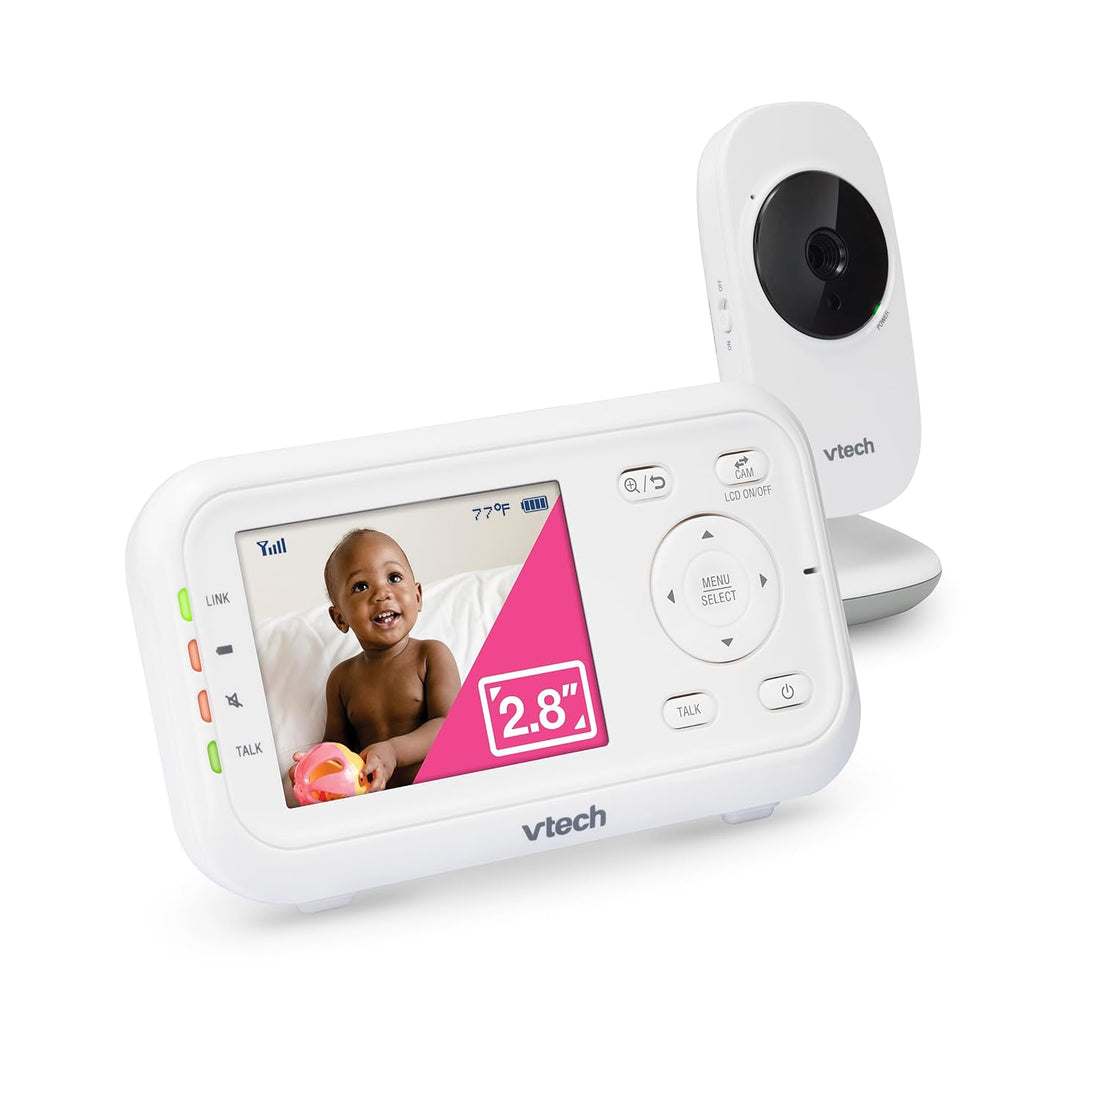 VTech VM3252 2.8? Digital Video Baby Monitor with Full-Color and Automatic Night Vision, White